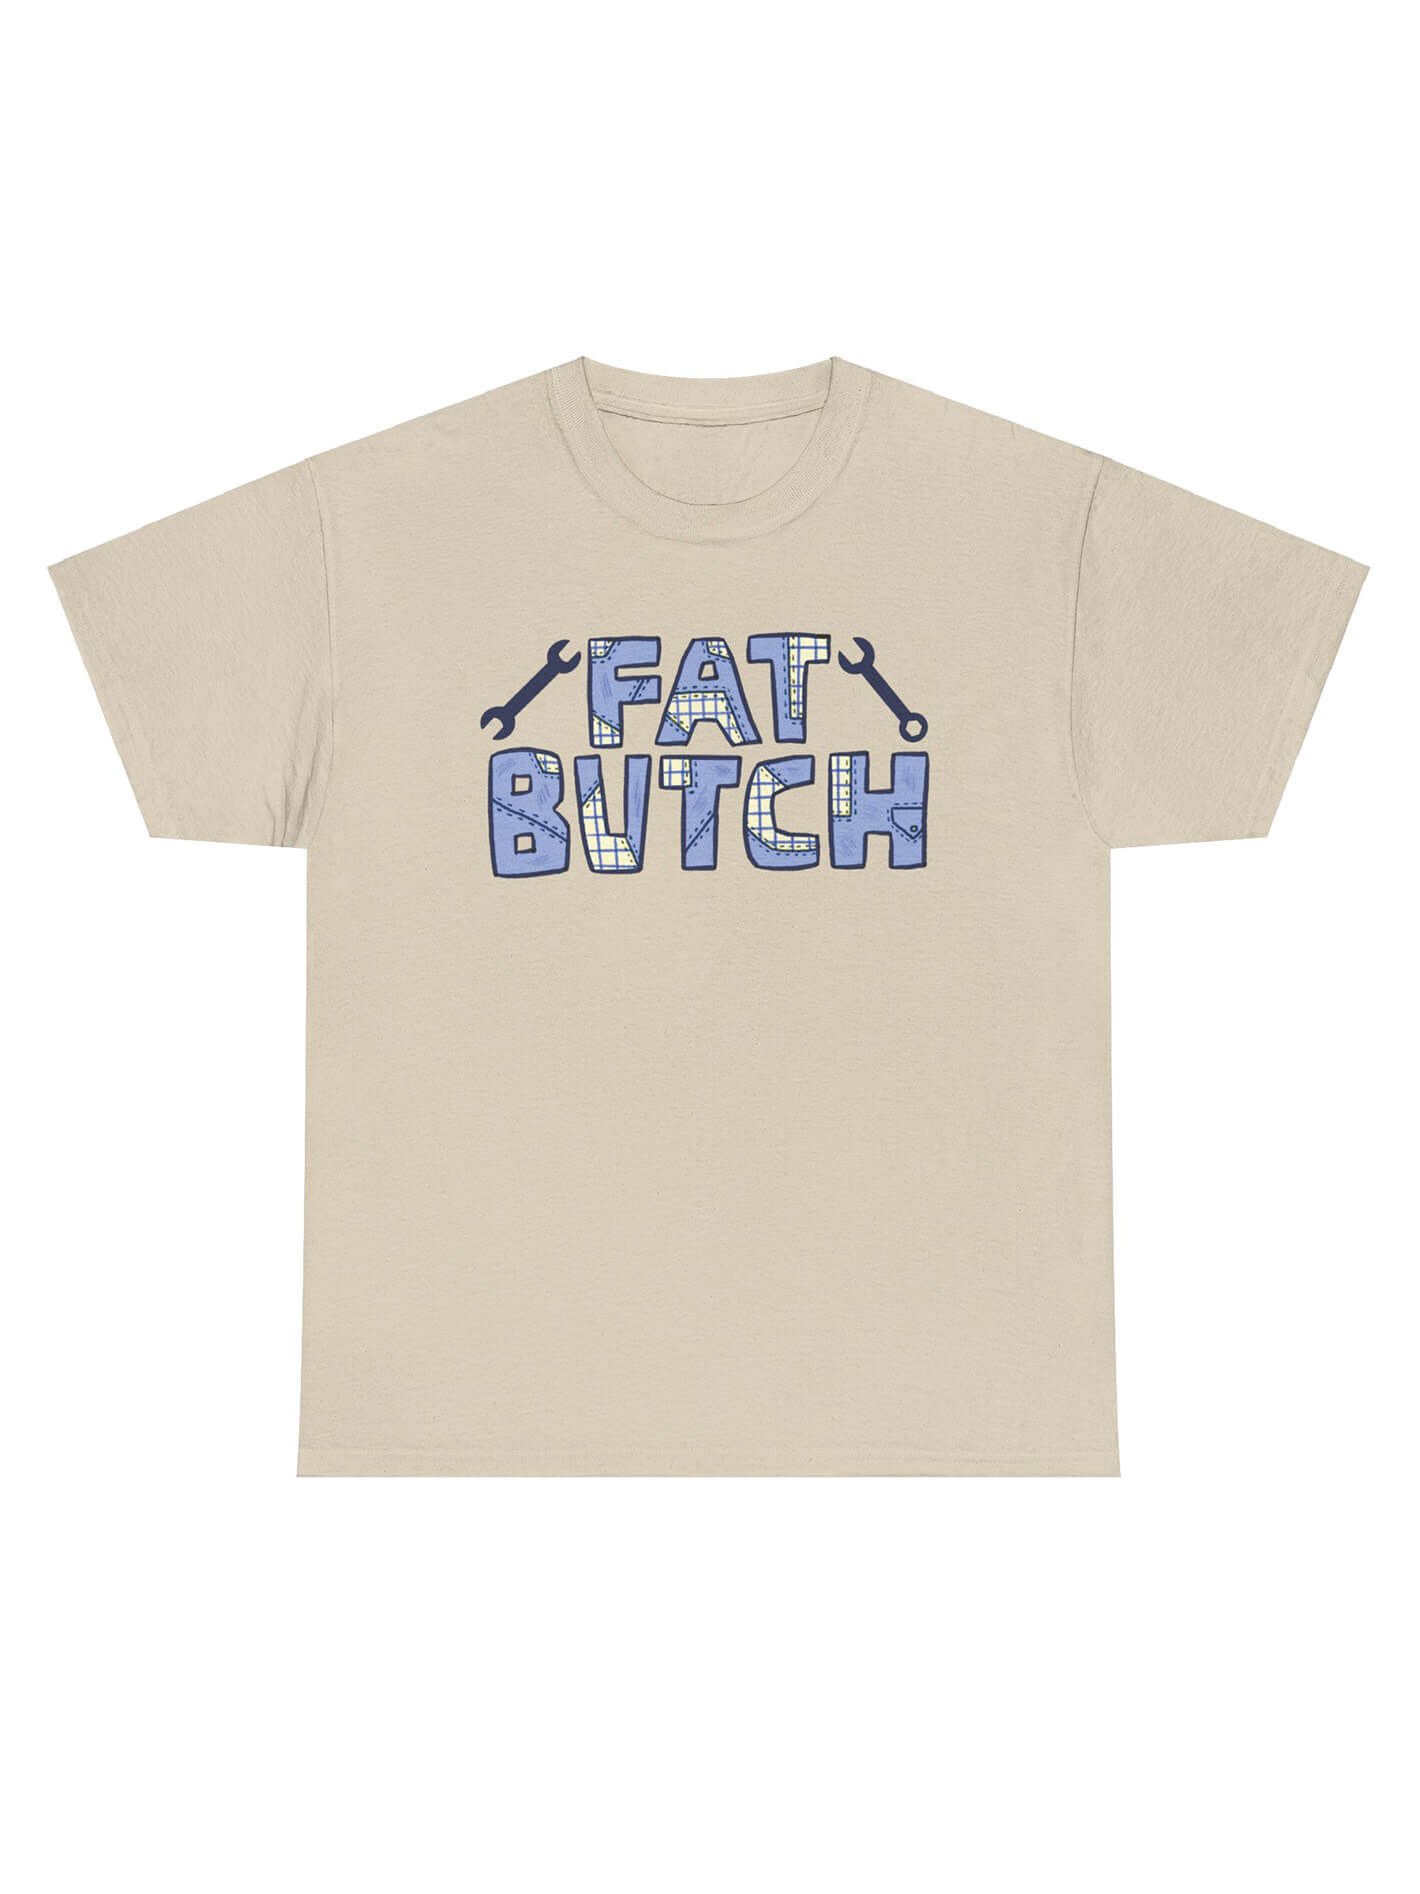 Queer fat butch sand colored graphic t-shirt.